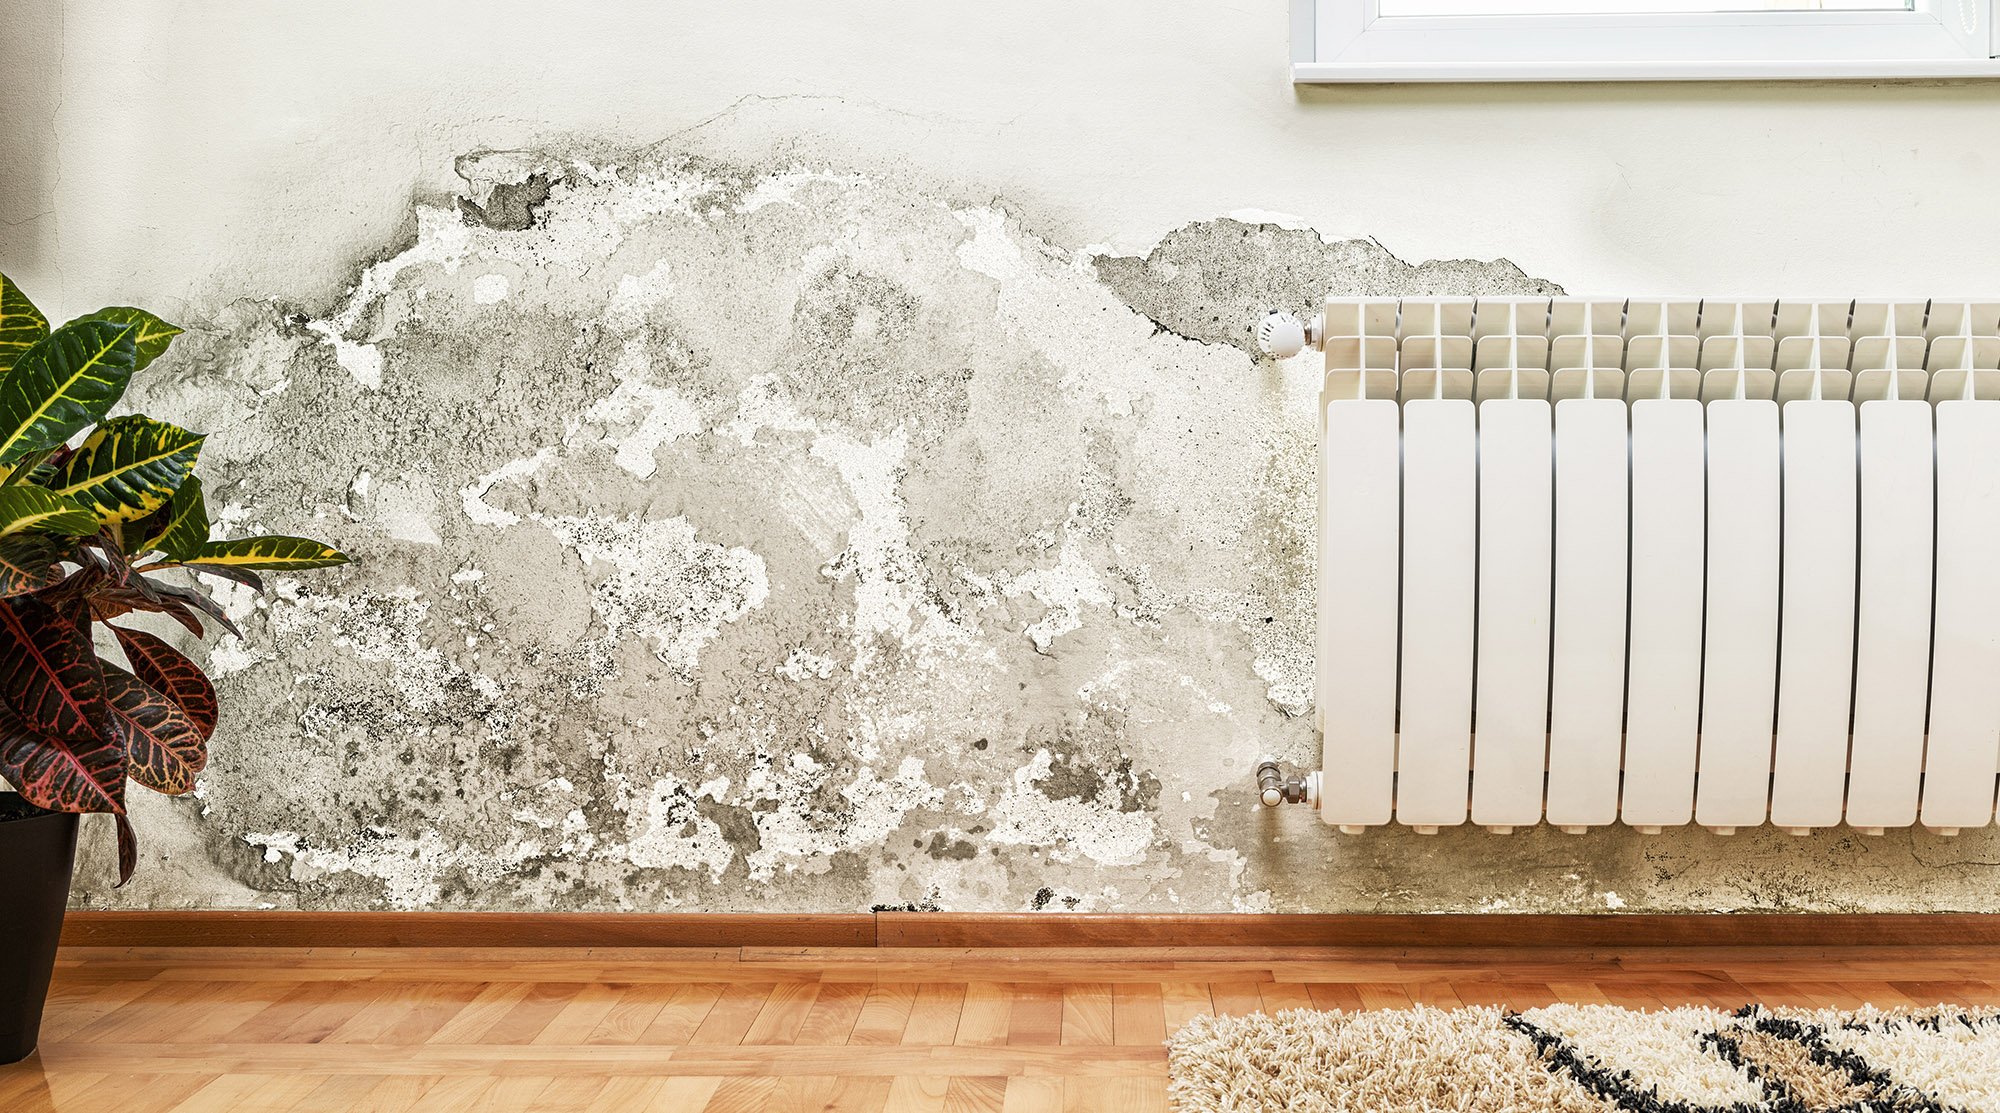 How to Test for Mold (Even If You Can't See It) - Bob Vila